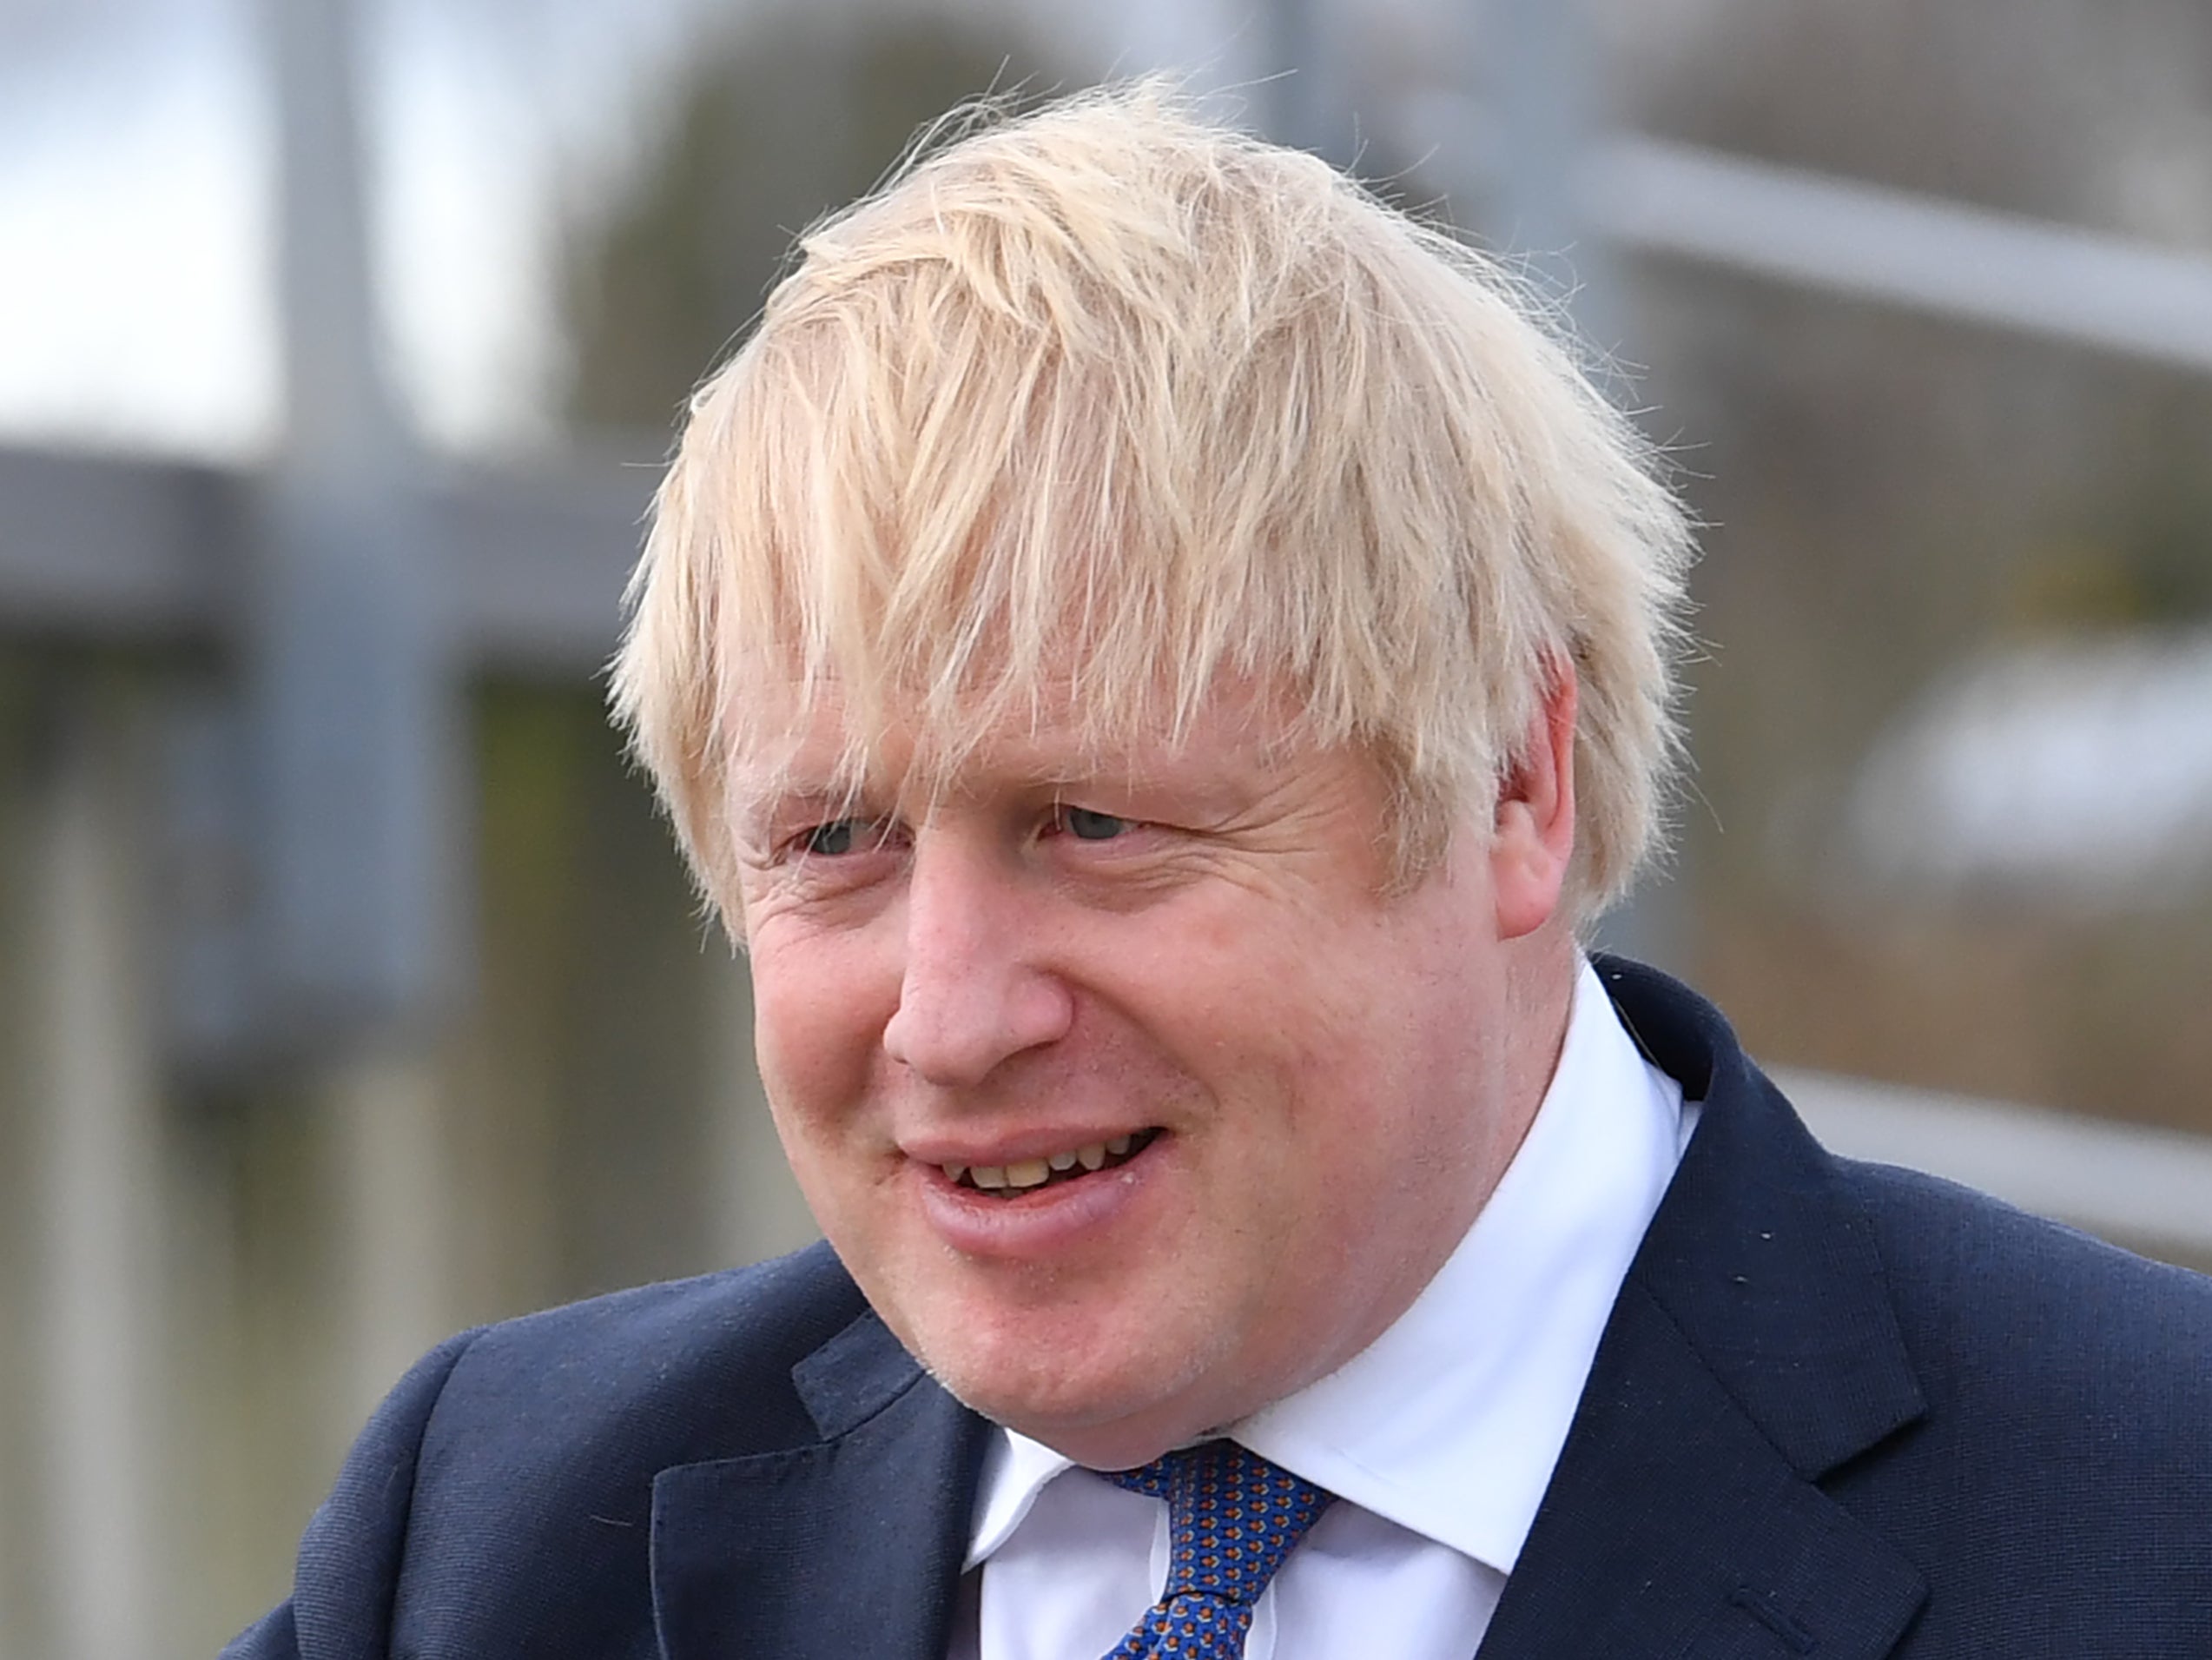 Boris Johnson was able to keep value of holiday to Goldmith’s Spanish villa private using ‘ministerial exemption’